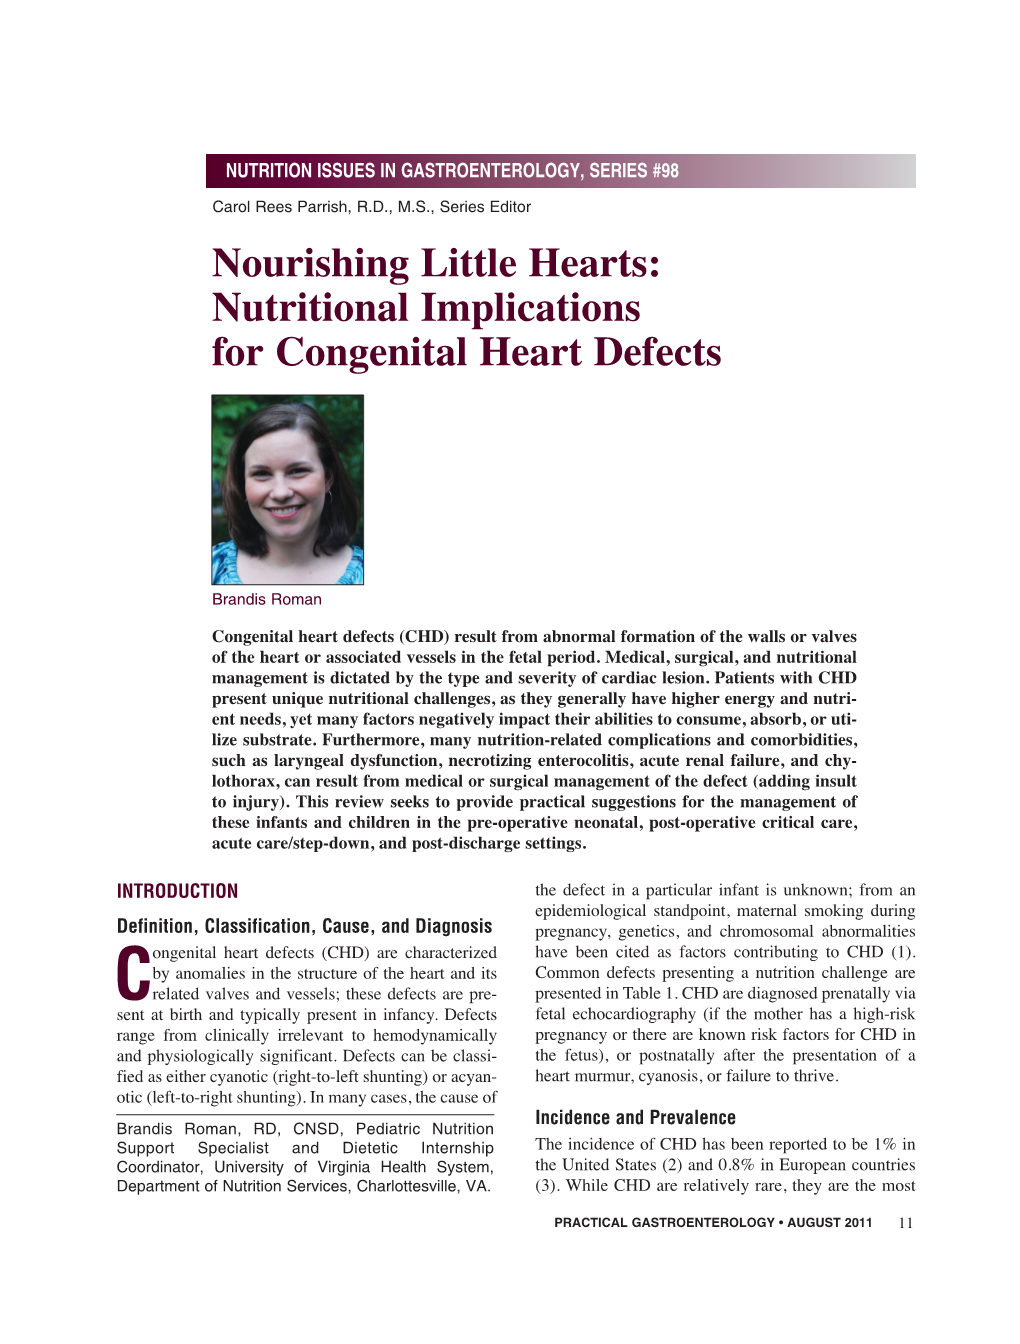 Nutritional Implications for Congenital Heart Defects